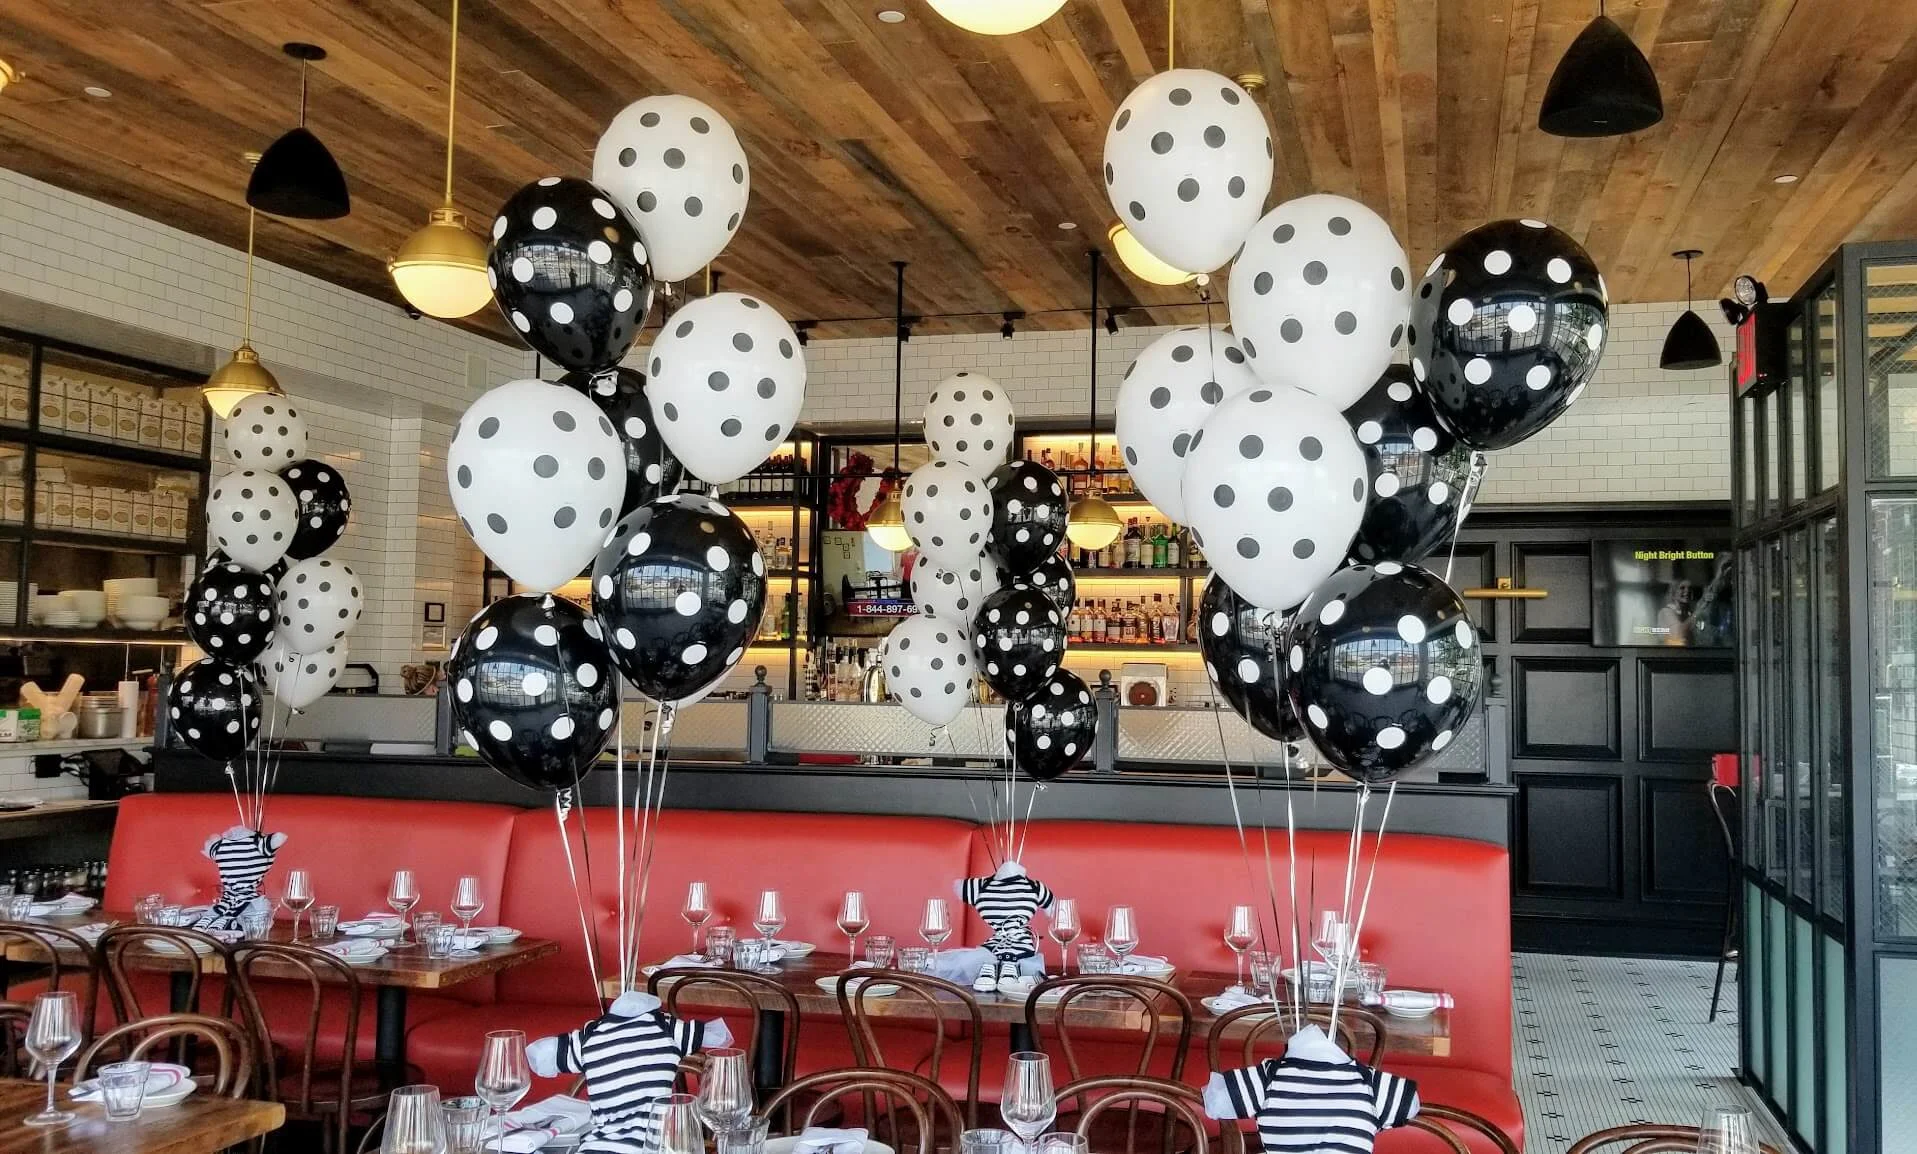 Stylish polka dot balloon decorations by Balloons Lane in Brooklyn, featuring a mix of black and white balloons for party centerpieces.